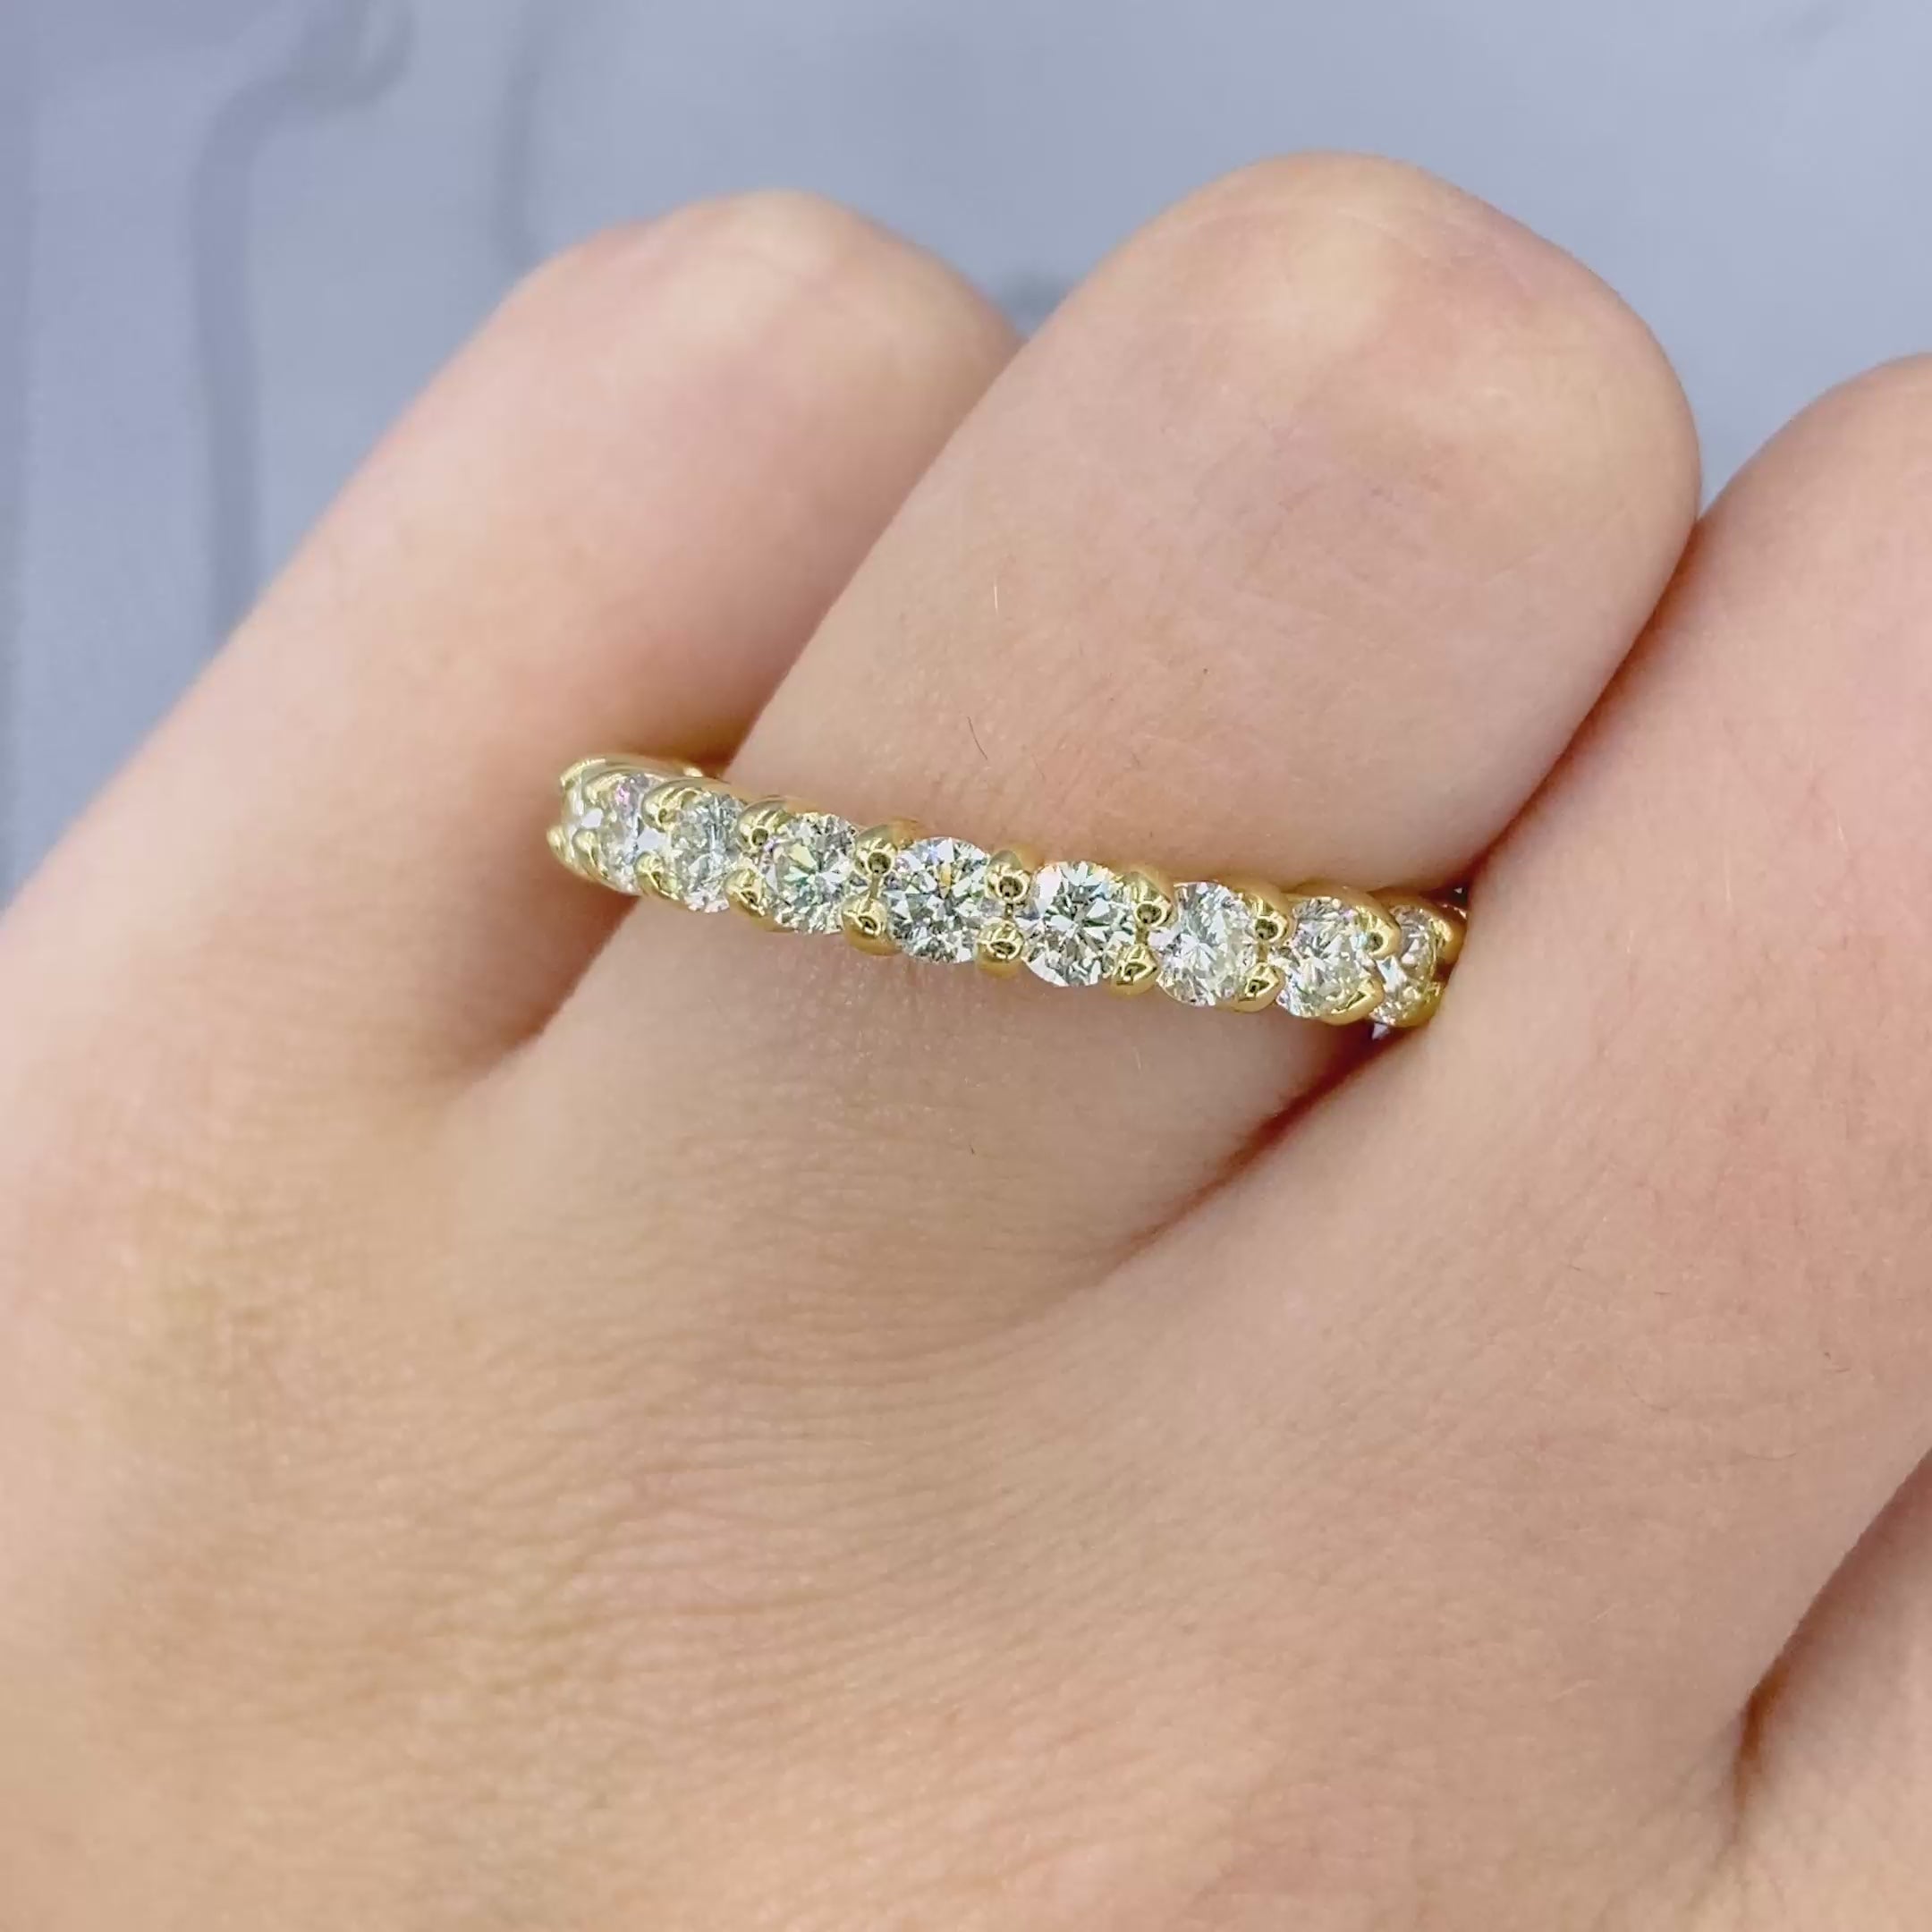 Blissful 2.50CT Round Cut Diamond Eternity Ring in 14KT Yellow Gold